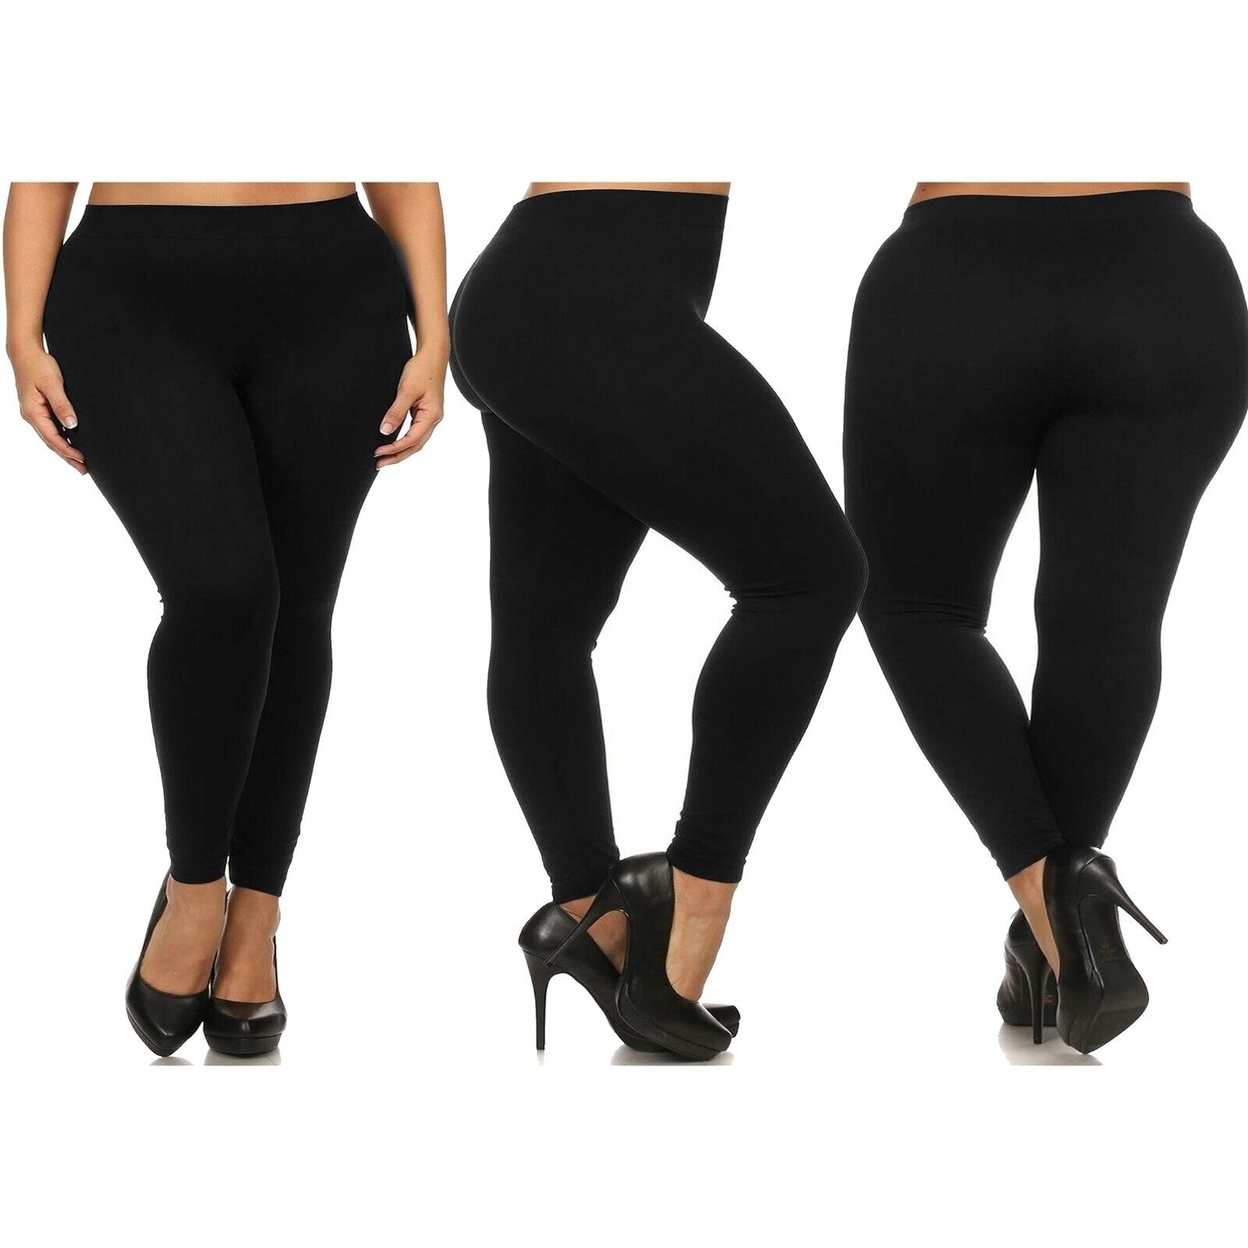 3-Pack: Women's Casual Ultra-Soft Smooth High Waisted Athletic Active Yoga Leggings Plus Size Available - Black,black,black, 4x